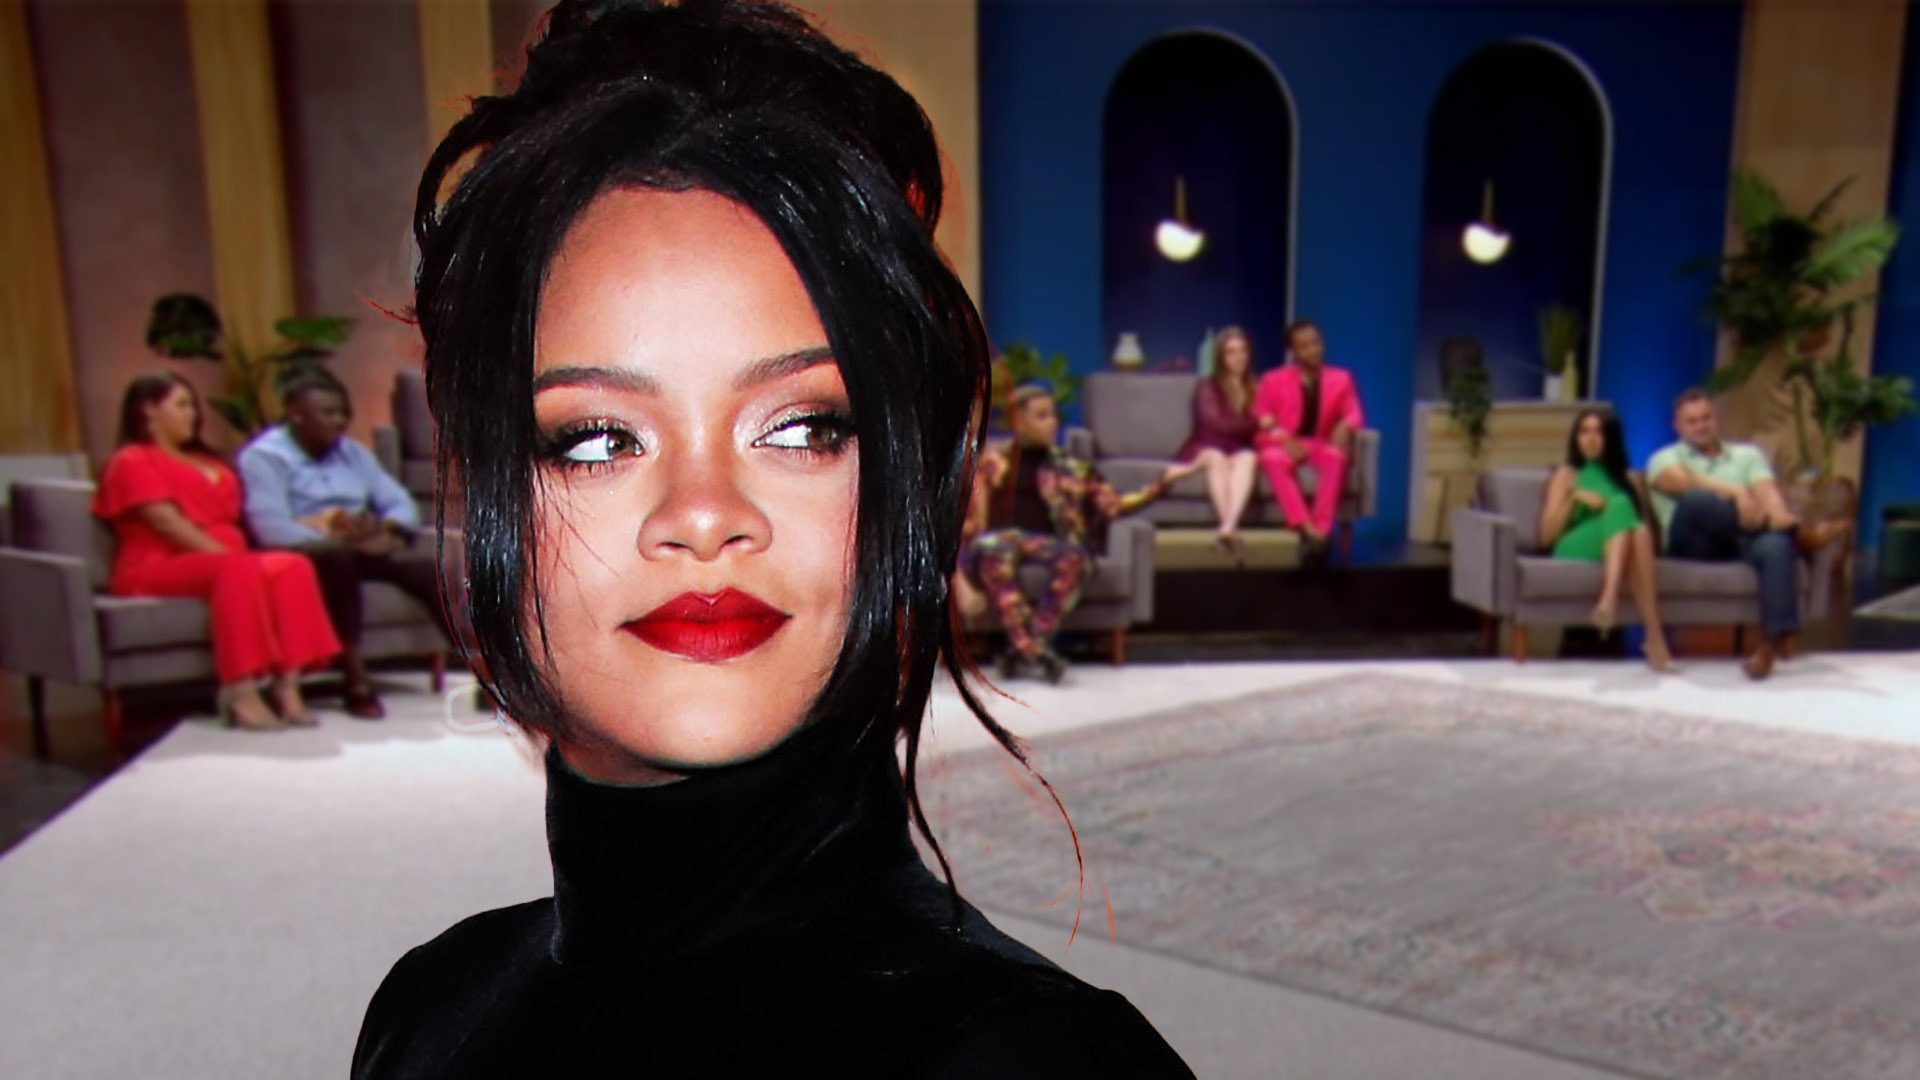 Even Rihanna Is A Fan Of This ‘Trash’ Reality TV Show